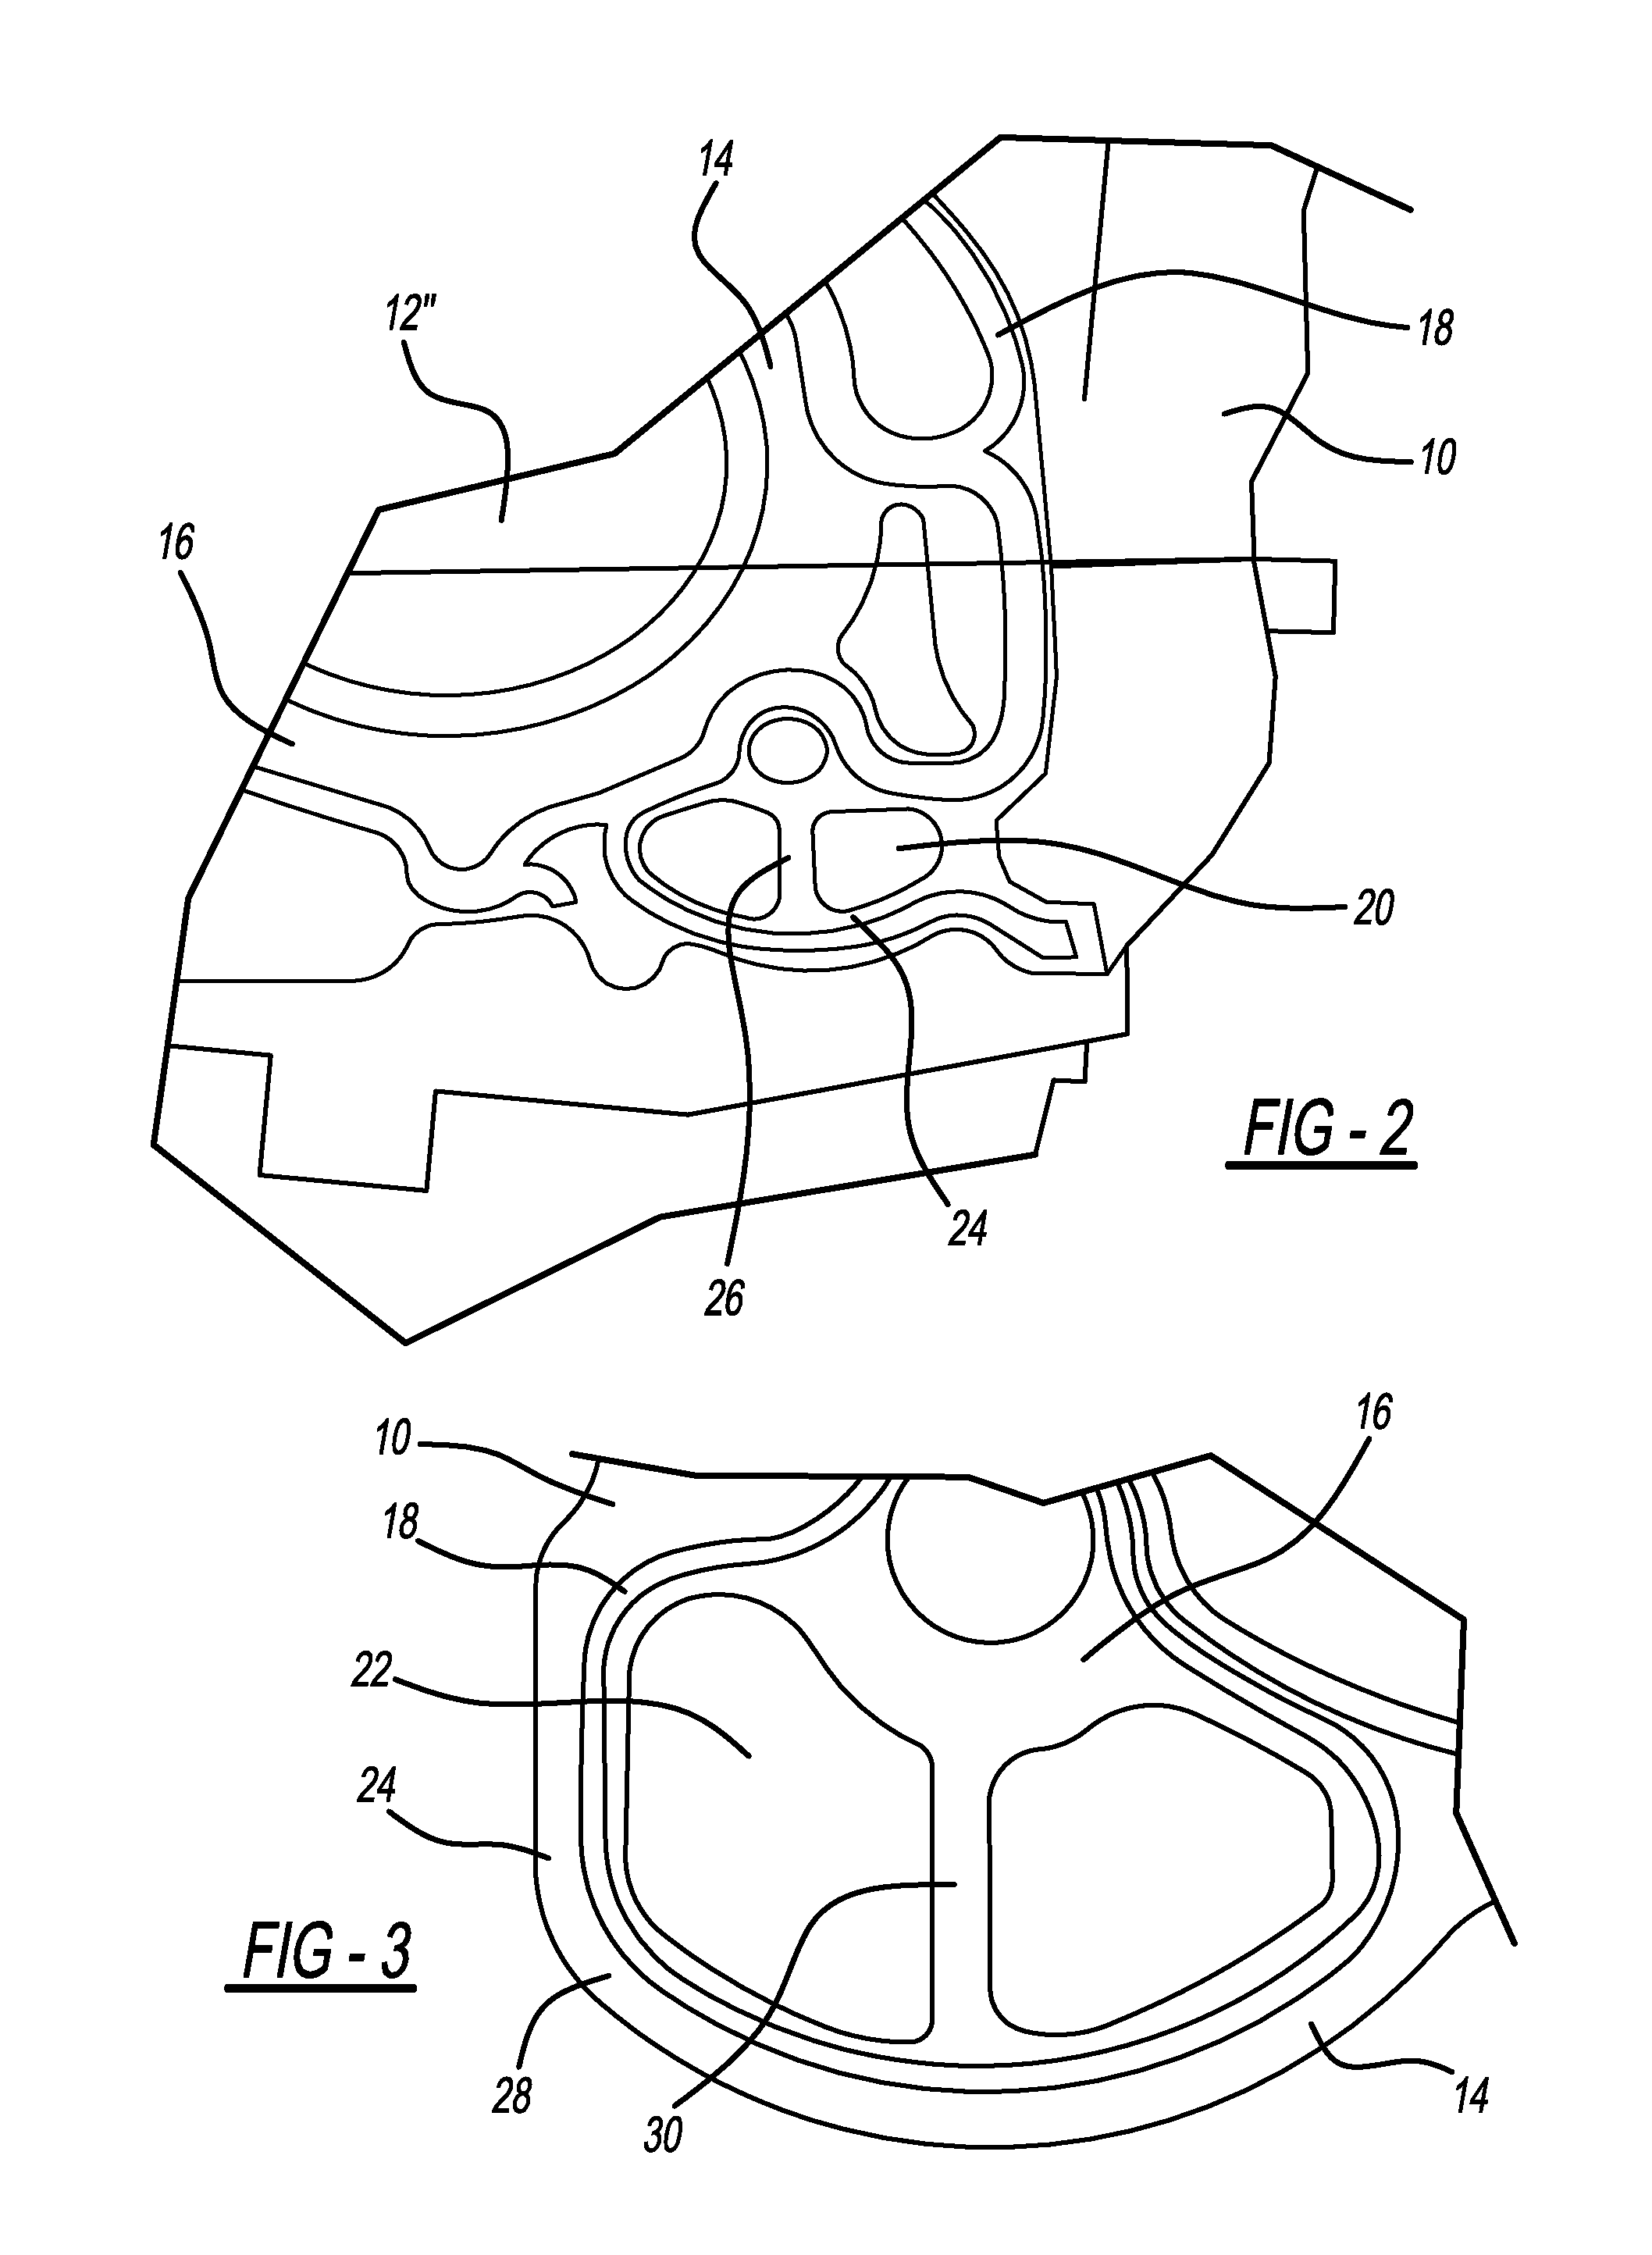 Cylinder gasket having oil drainback constraint feature for use with internal combustion engine